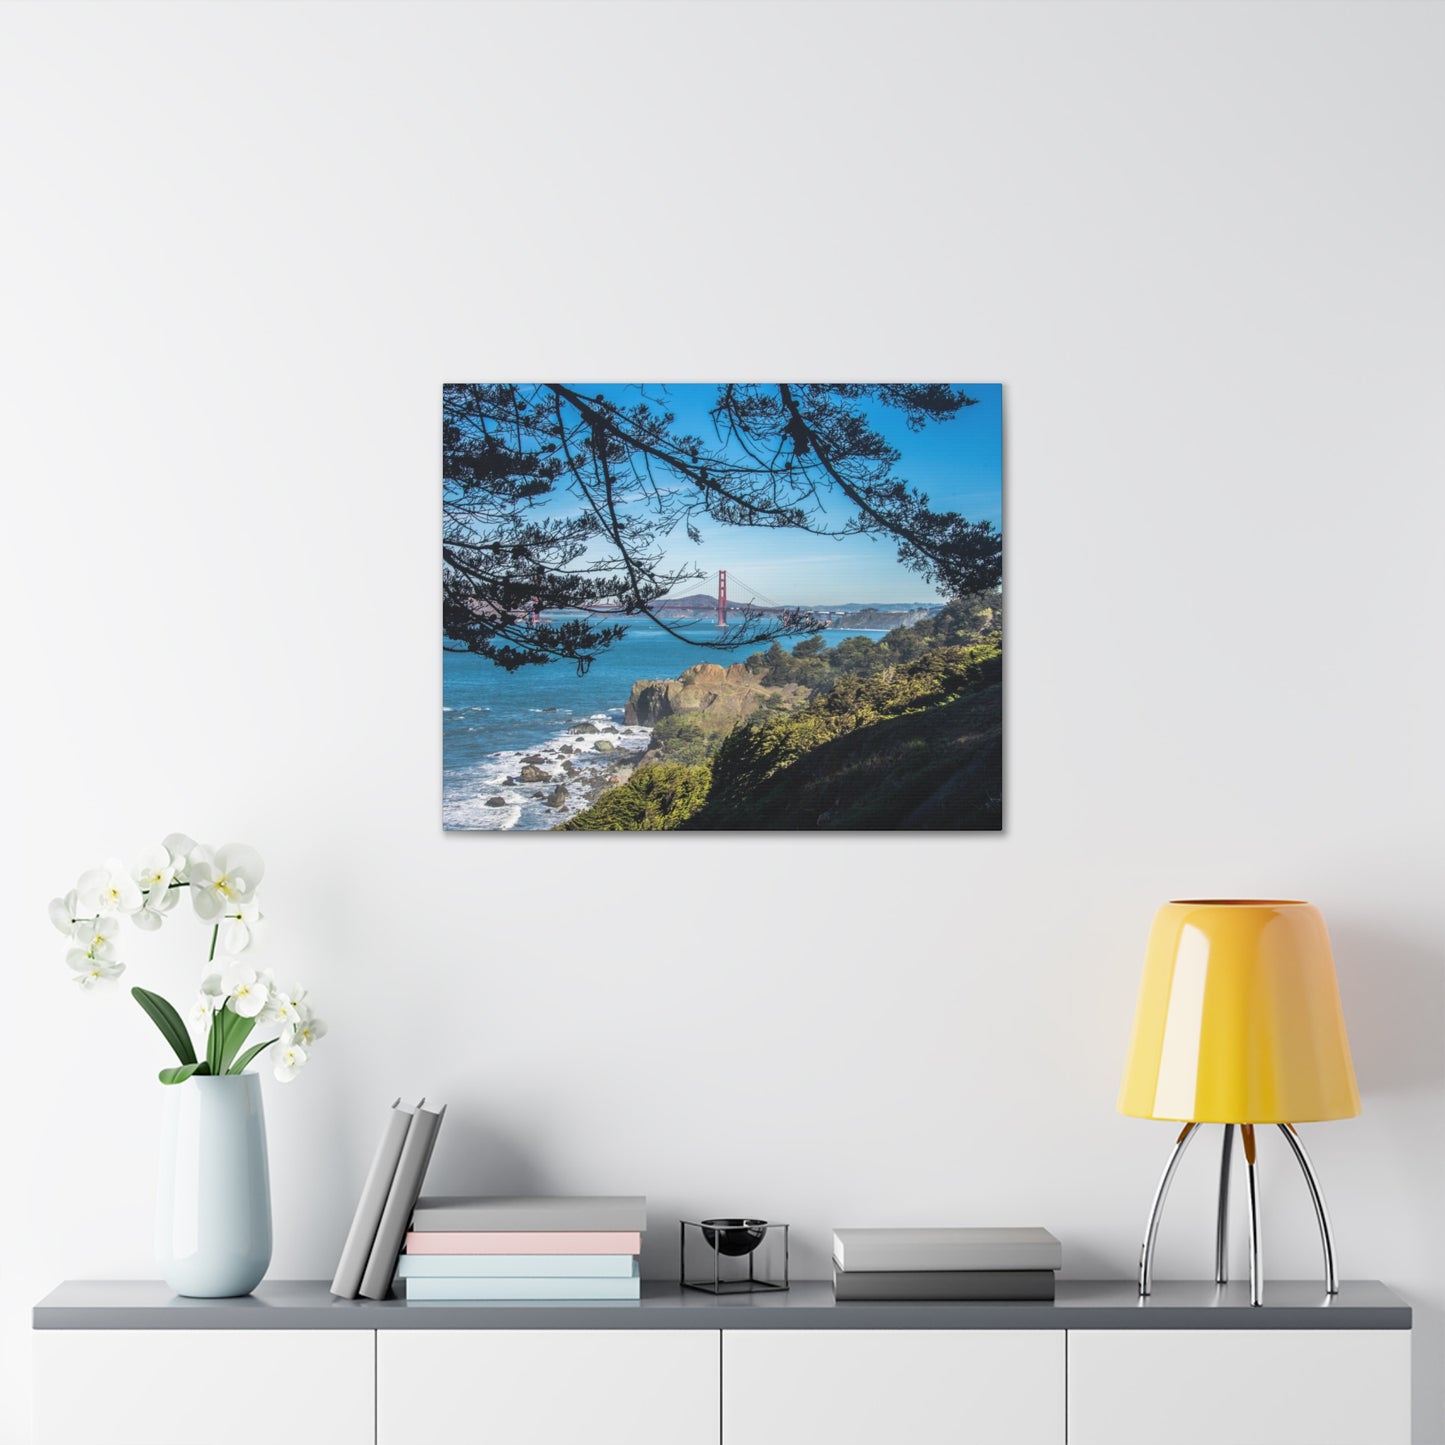 Canvas Print Of Trees Shoreline And Golden Gate Bridge In San Francisco For Wall Art